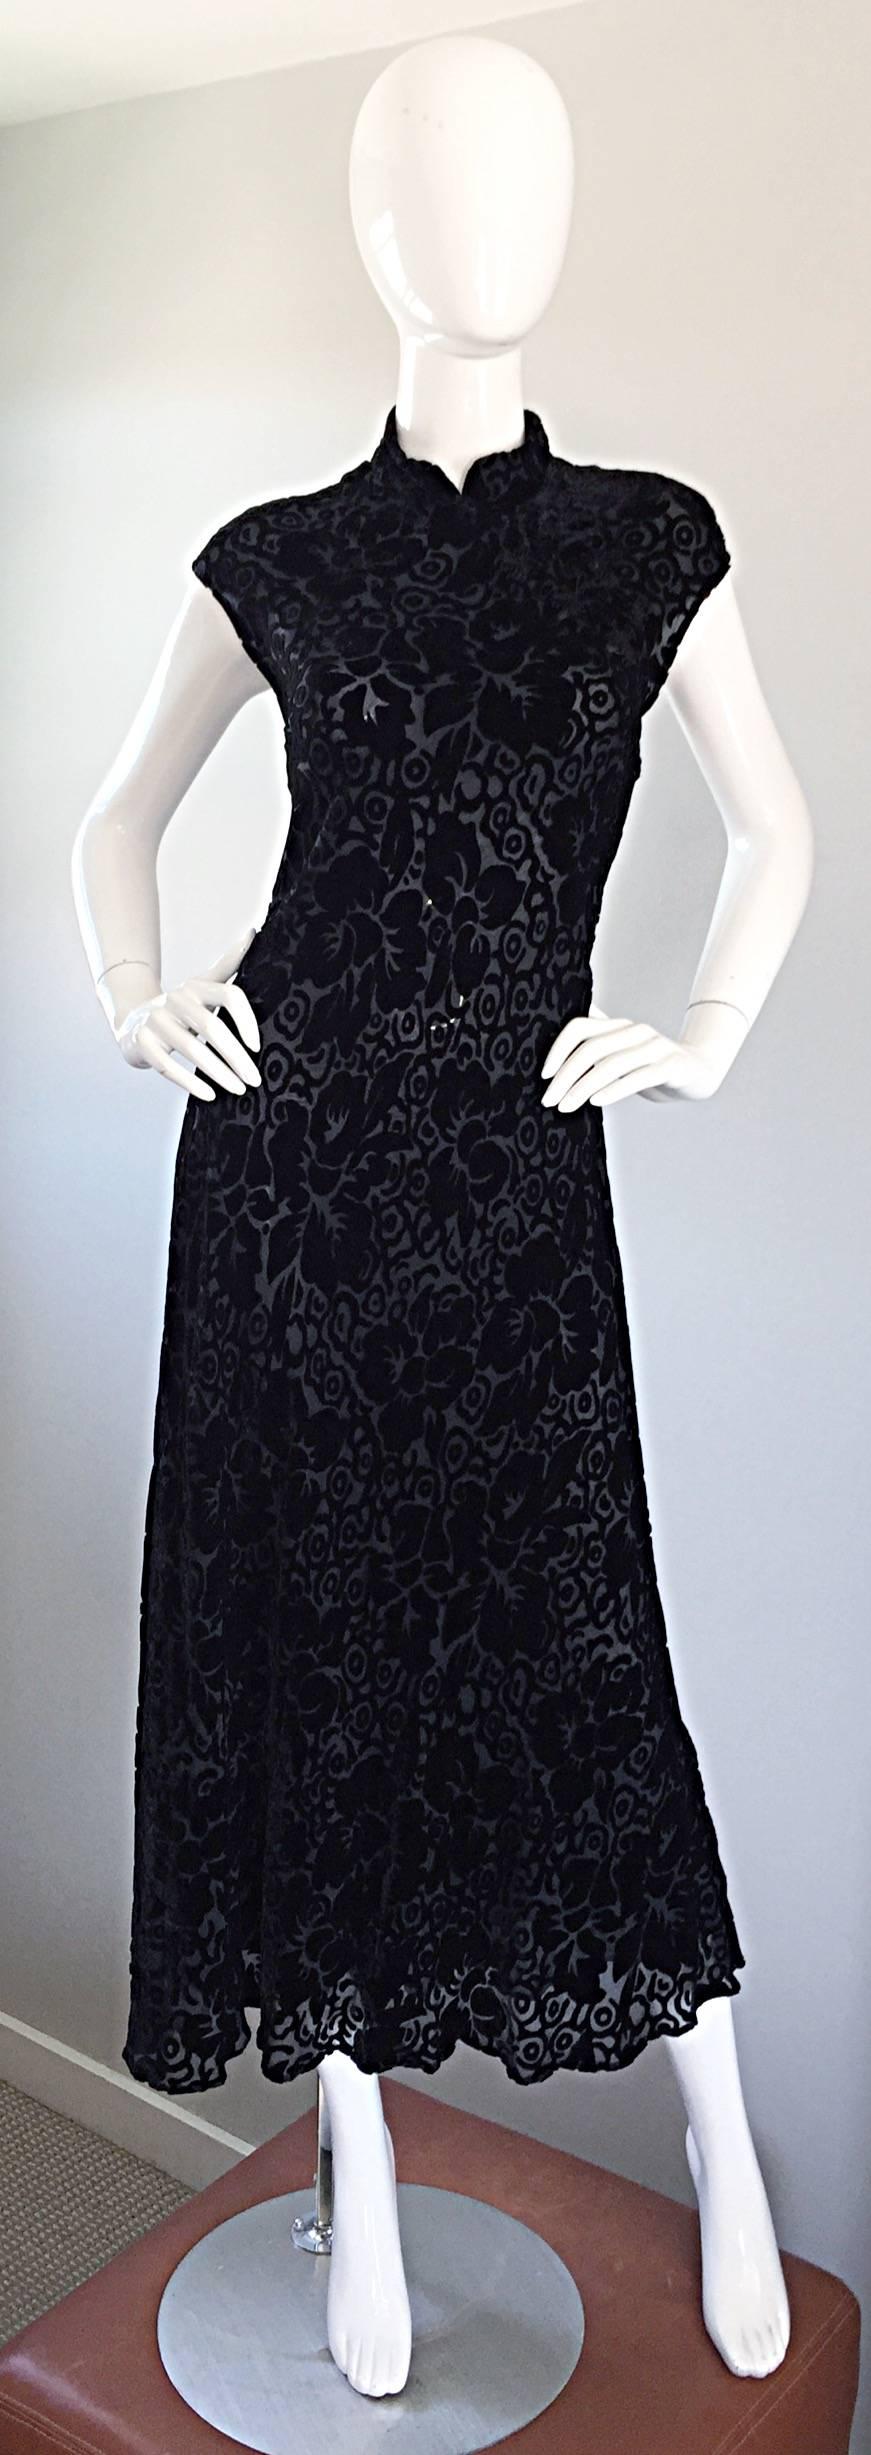 Important vintage DONNA KARAN early 1990s 90s Chinese inspired black silk and velvet full length gown! Features a chic high neck with snaps up the side bodice and hook-and-eye closure at the top neck. Effortlessly chic with a sweeping skirt and